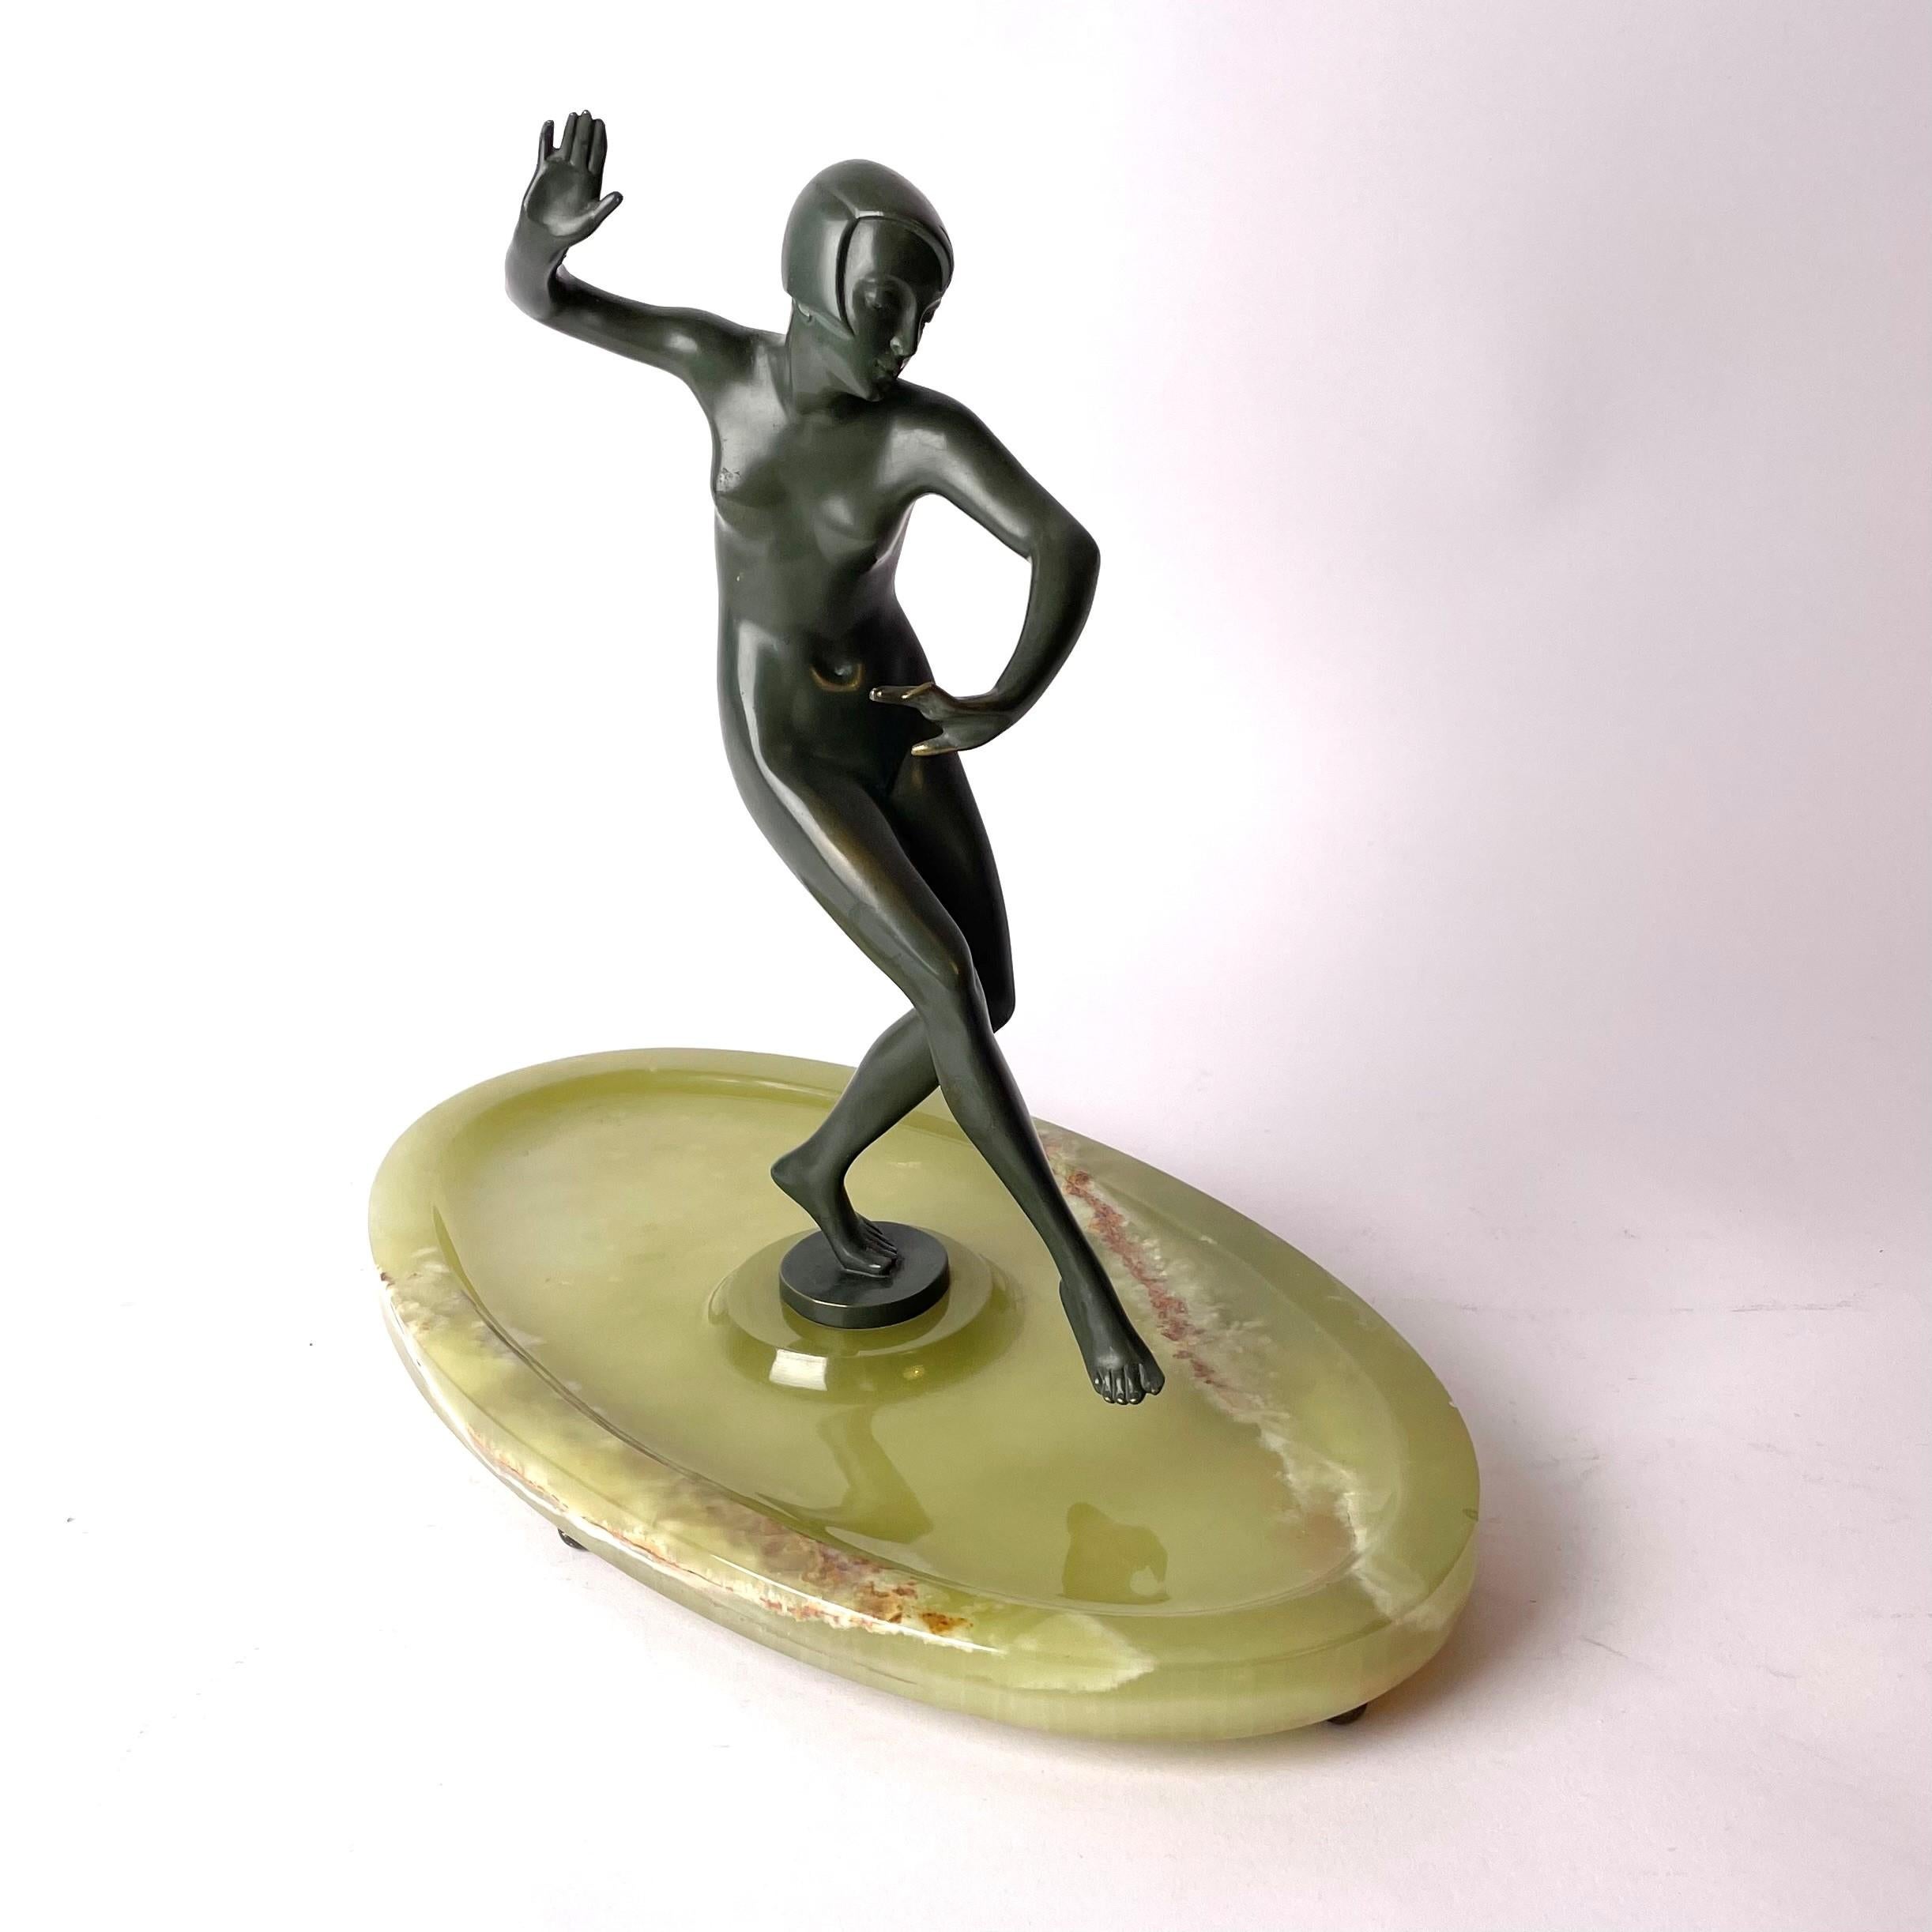 Elegant art deco sculpture by Johann Wolfgang Elischer (Austria 1891-1966). Made in colored bronze with an onyx base. Art Deco circa 1920s and signed in the bronze base.

Wear consistent with age an use.